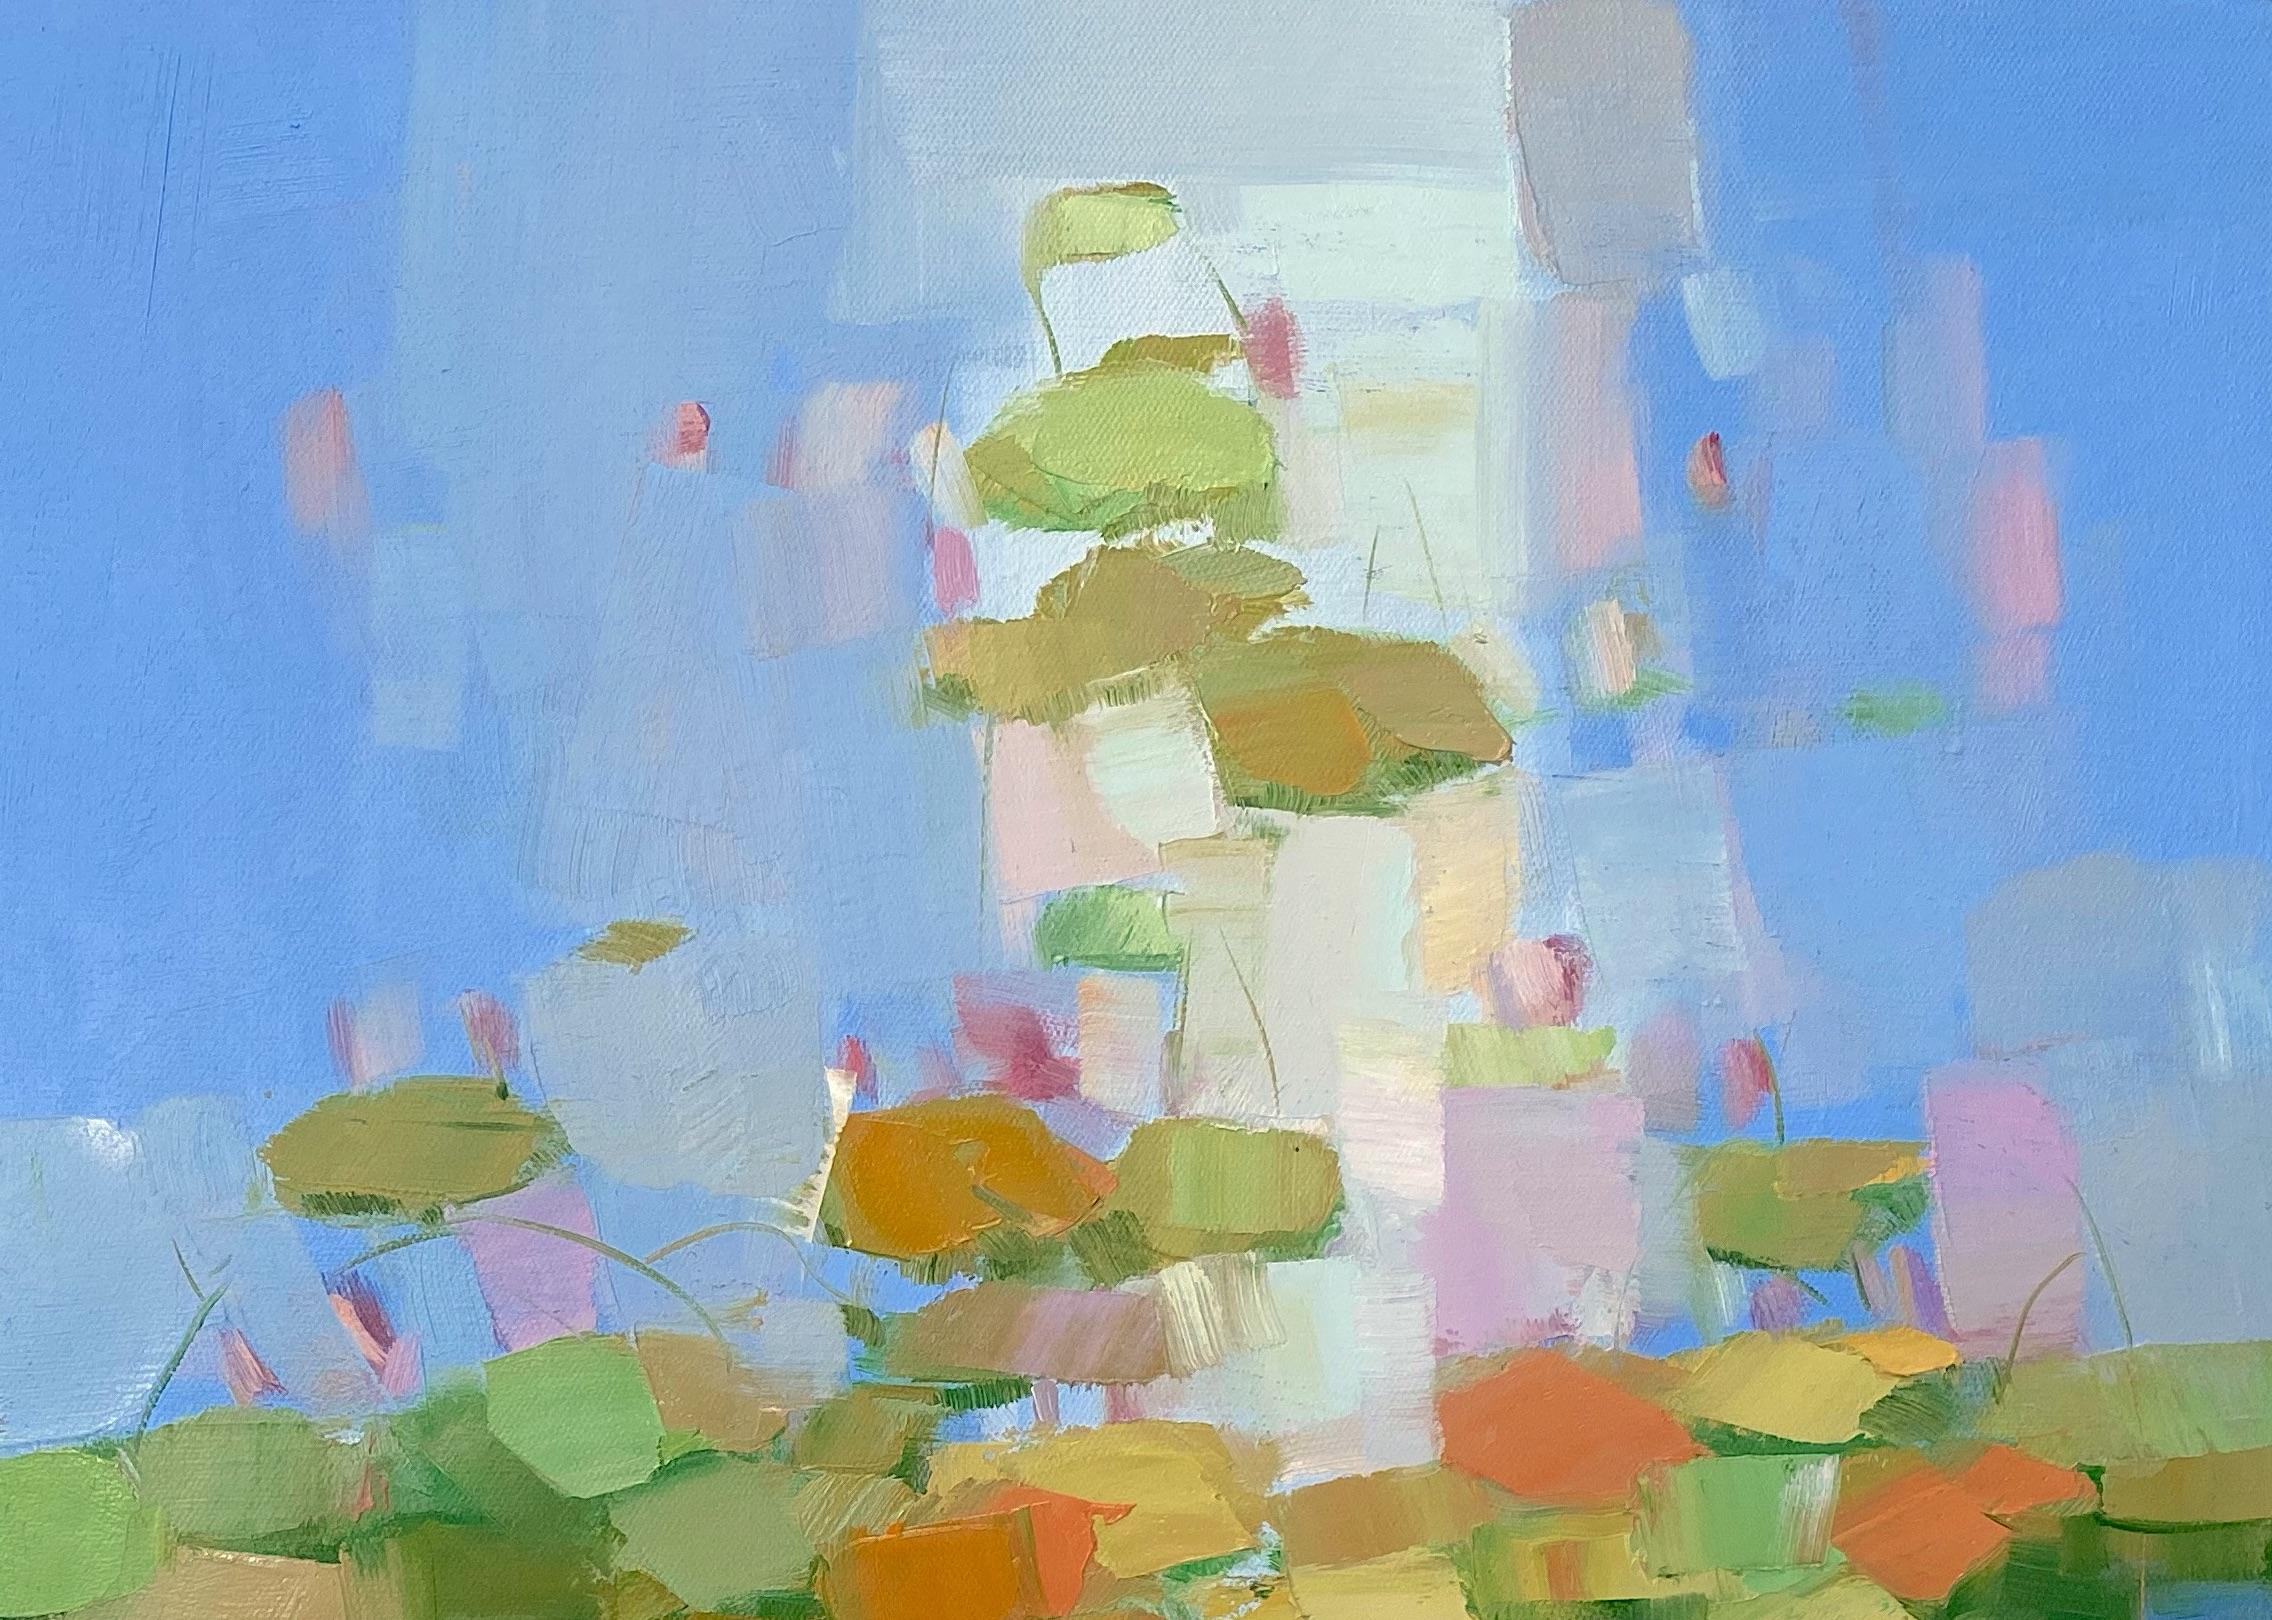 <p>Artist Comments<br />Rendered with a palette knife, artist Vahe Yeremyan captured these serene waterlilies in an abstract display of greens, orange, and pink on a diaphanous blue. The lilypads and pink flowers seemingly dance on the cool pond and